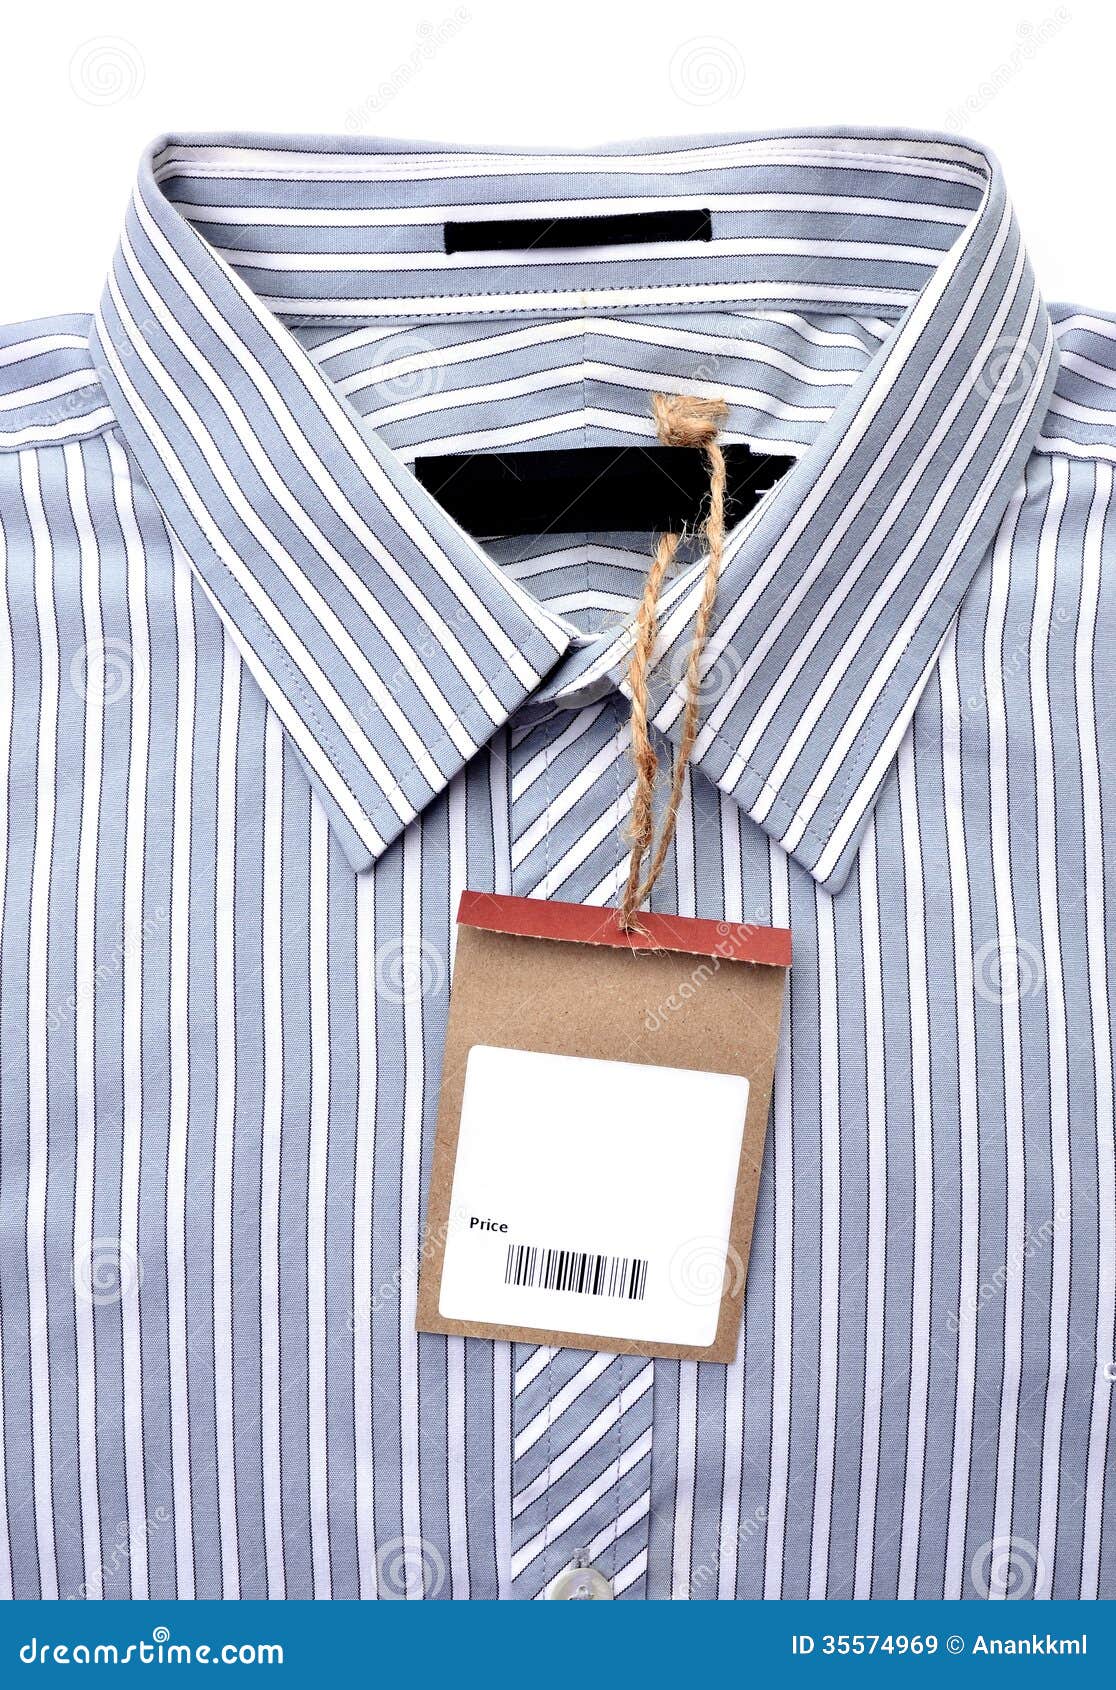 Shirt with price tag stock image. Image of tshirt, objects - 35574969